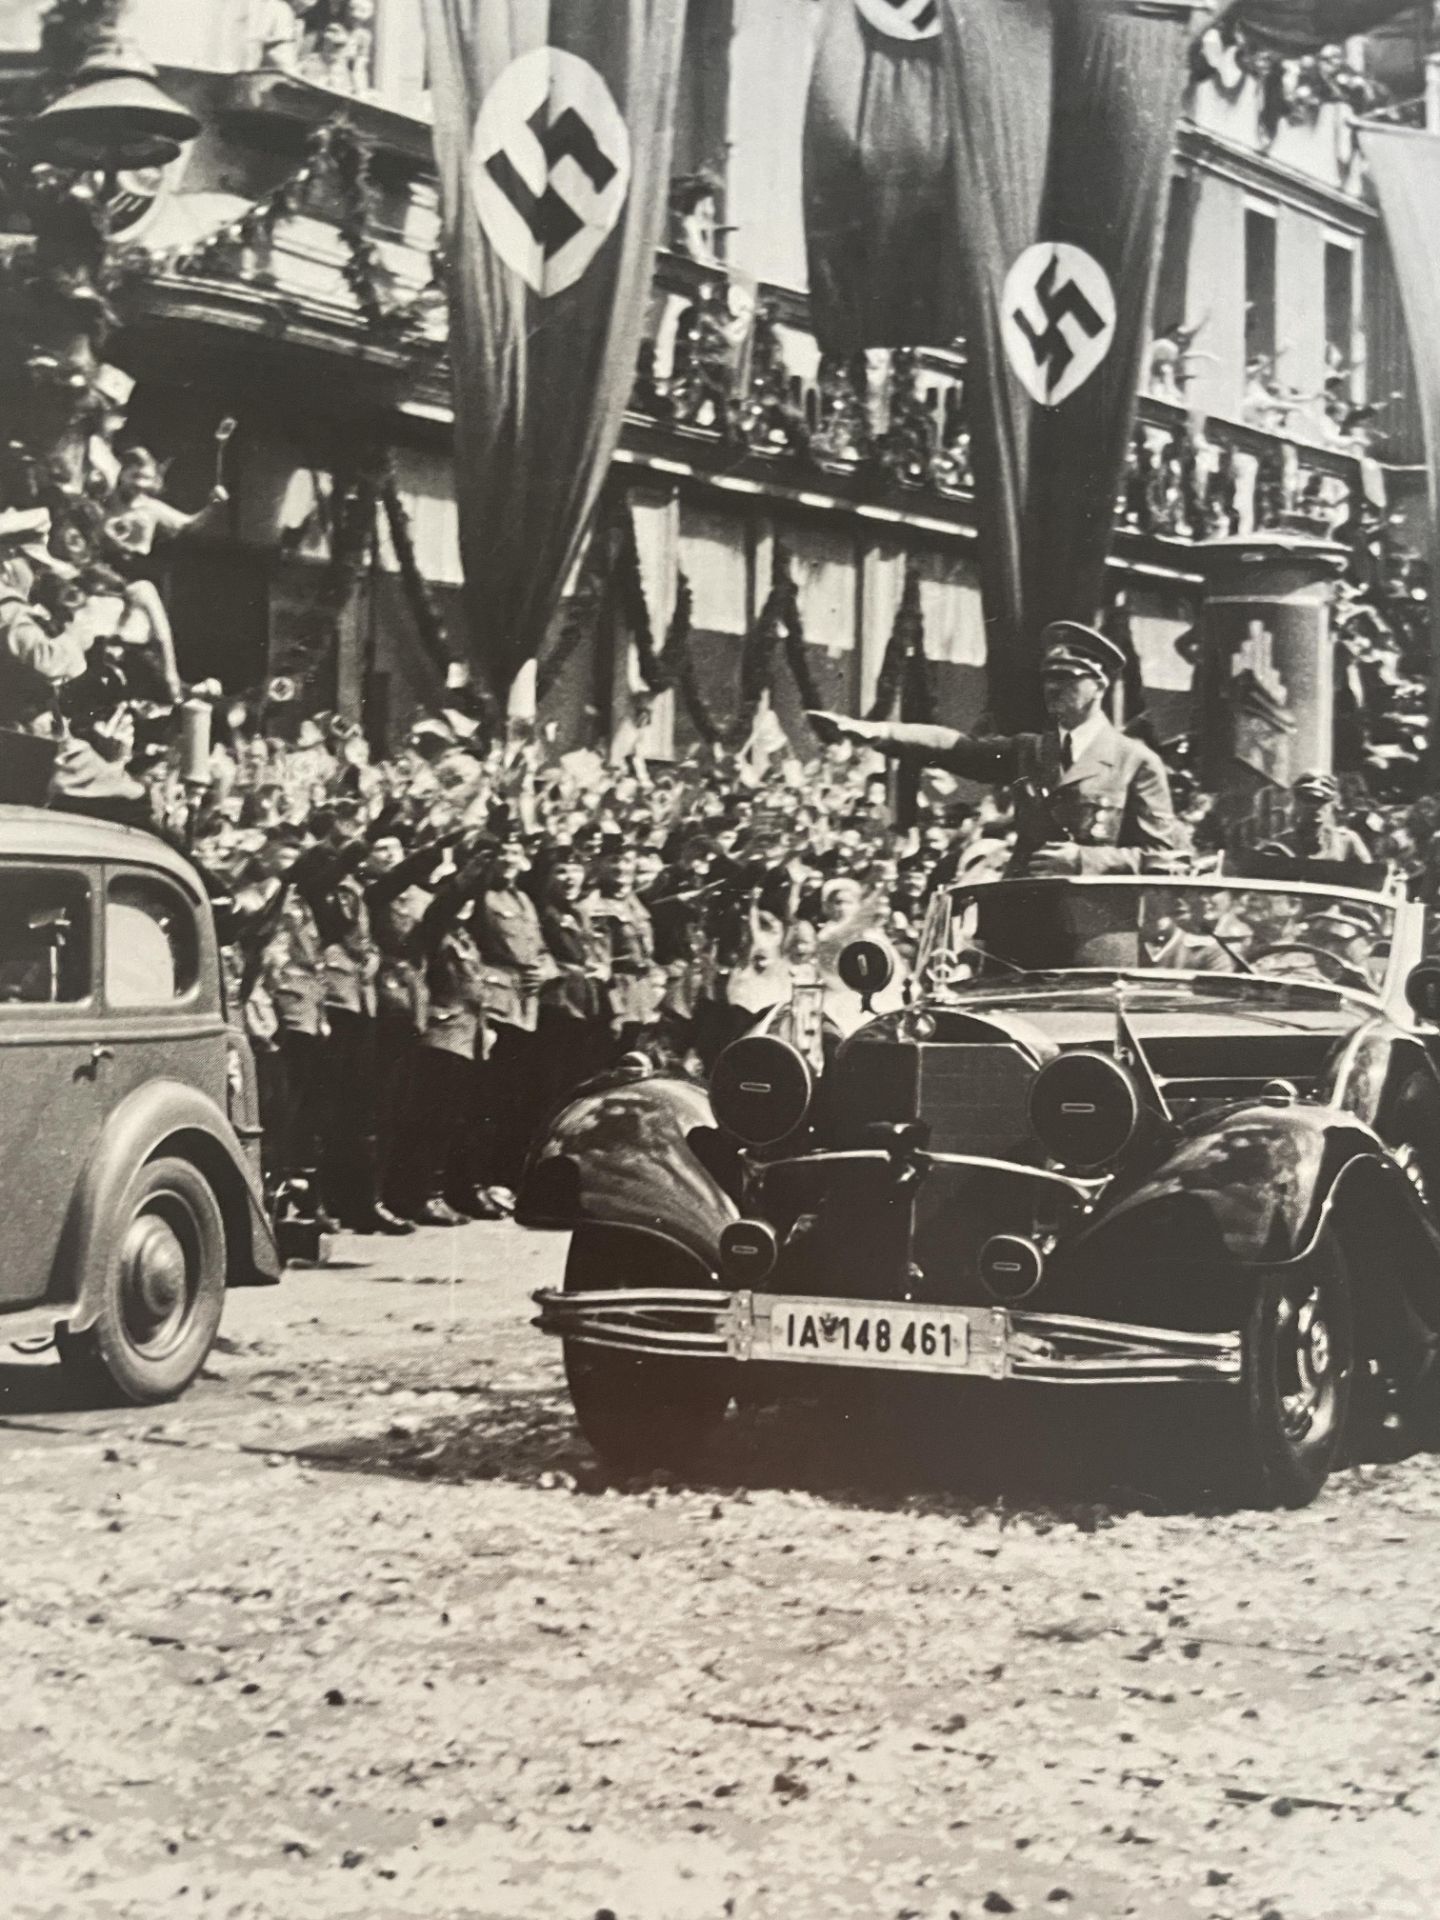 Germany "WWII, Adolf Hitler, Victory Parade" Print - Image 5 of 6